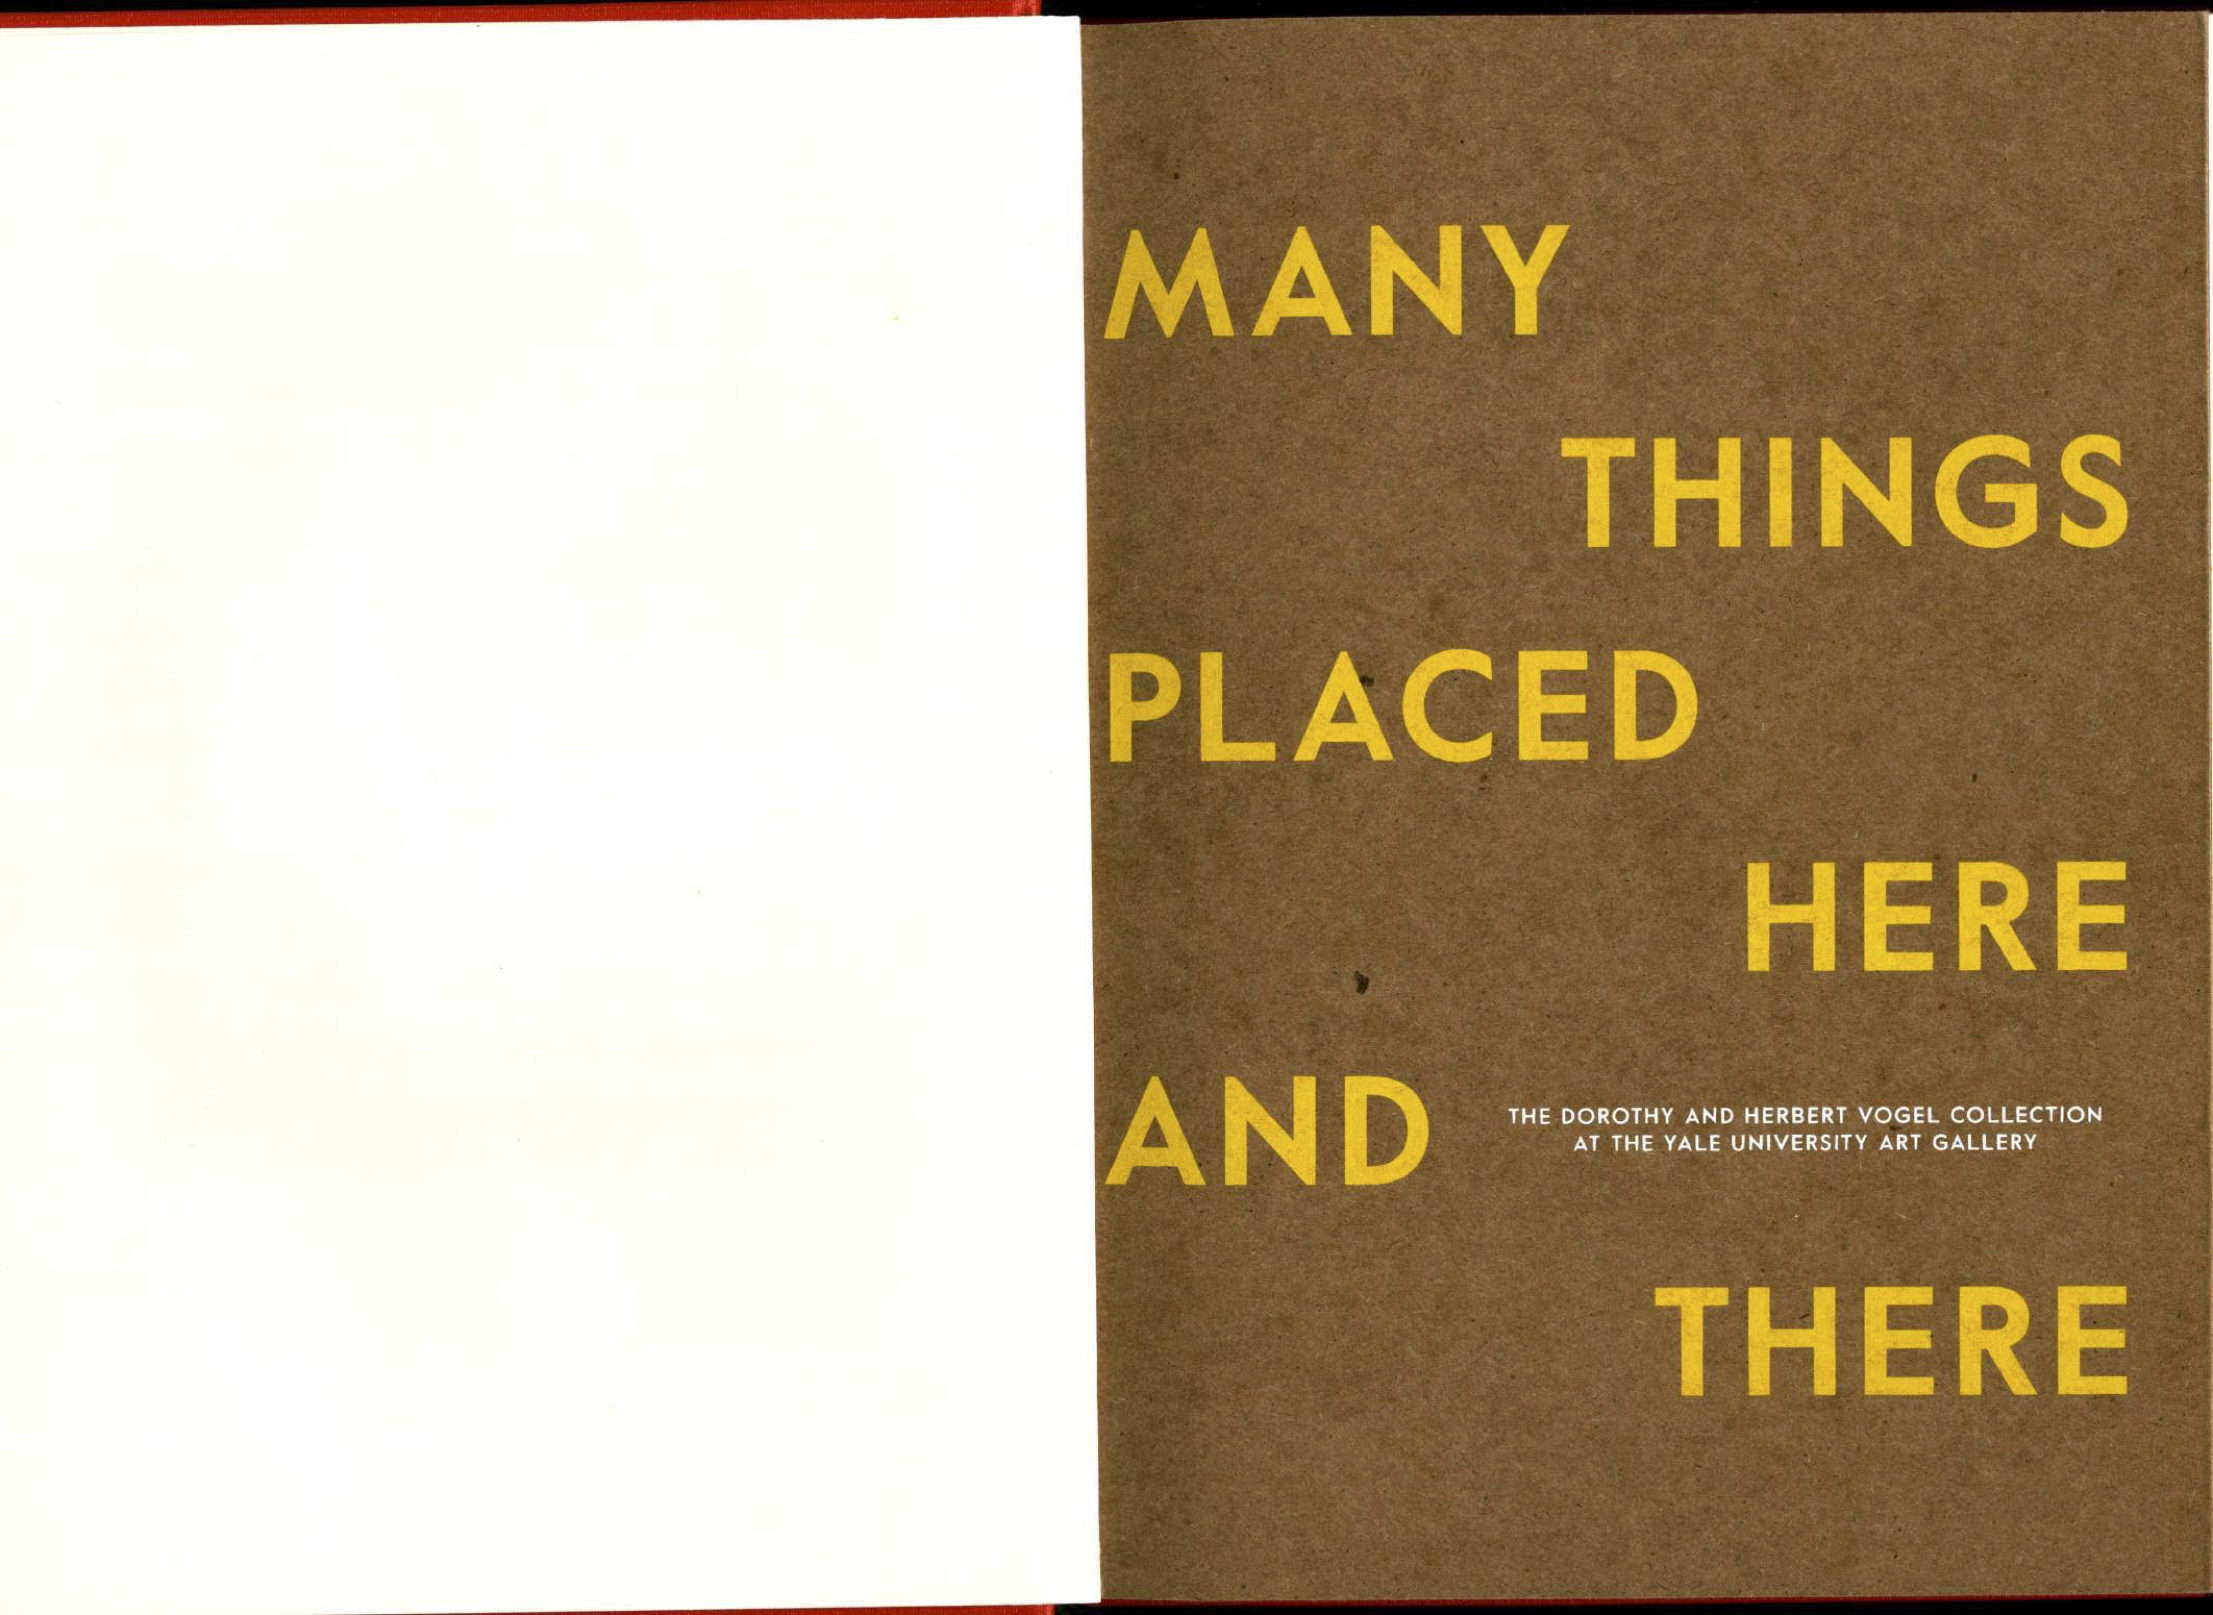 Molleen Theodore, ed. Many Things Placed Here and There, Yale University Art Museum, exhibition catalogue, 2013